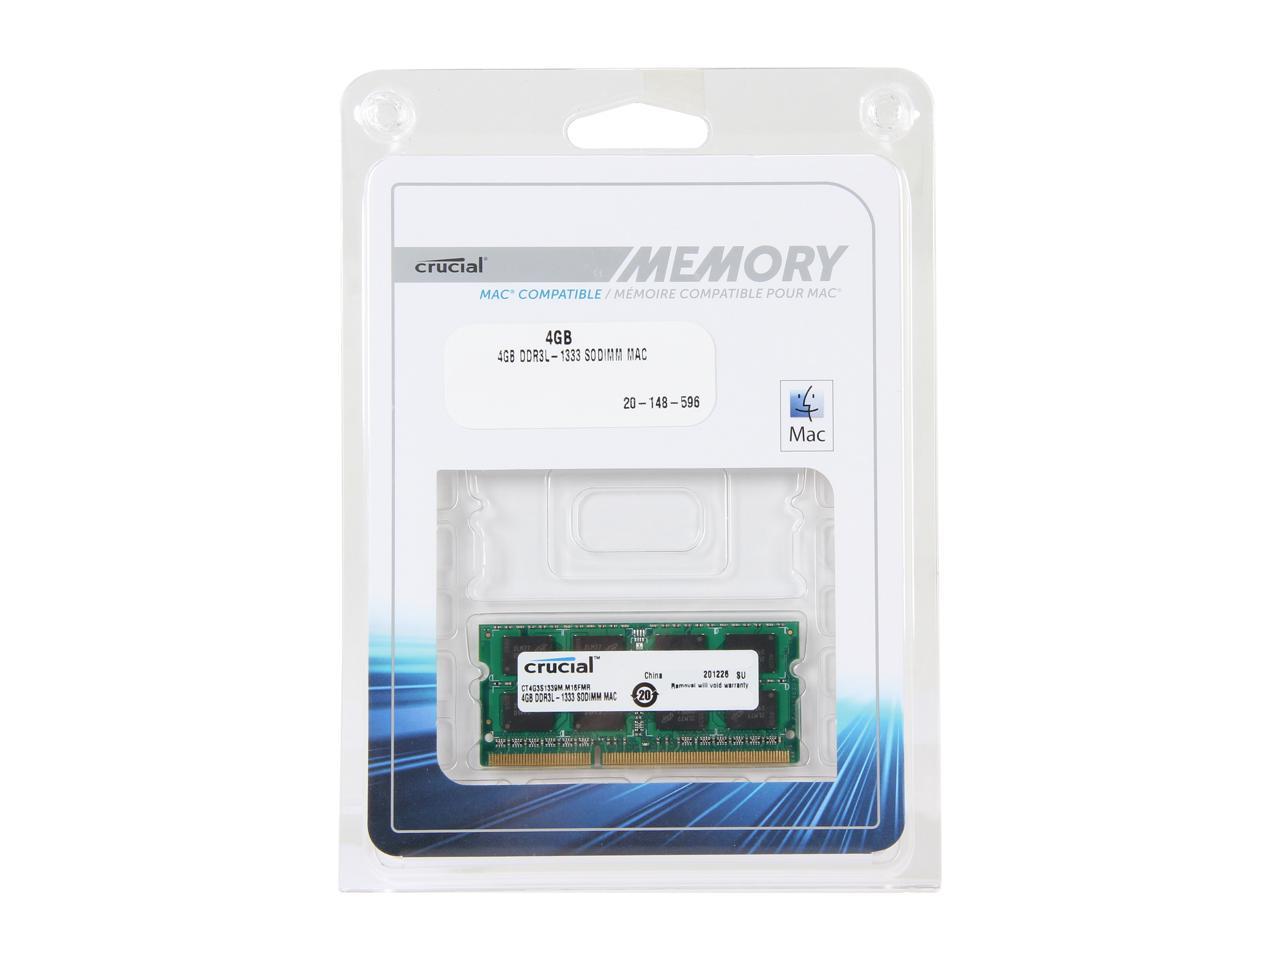 "Crucial 4GB DDR3L-1333 SODIMM Memory for Mac - CT4G3S1339M" - image 3 of 3